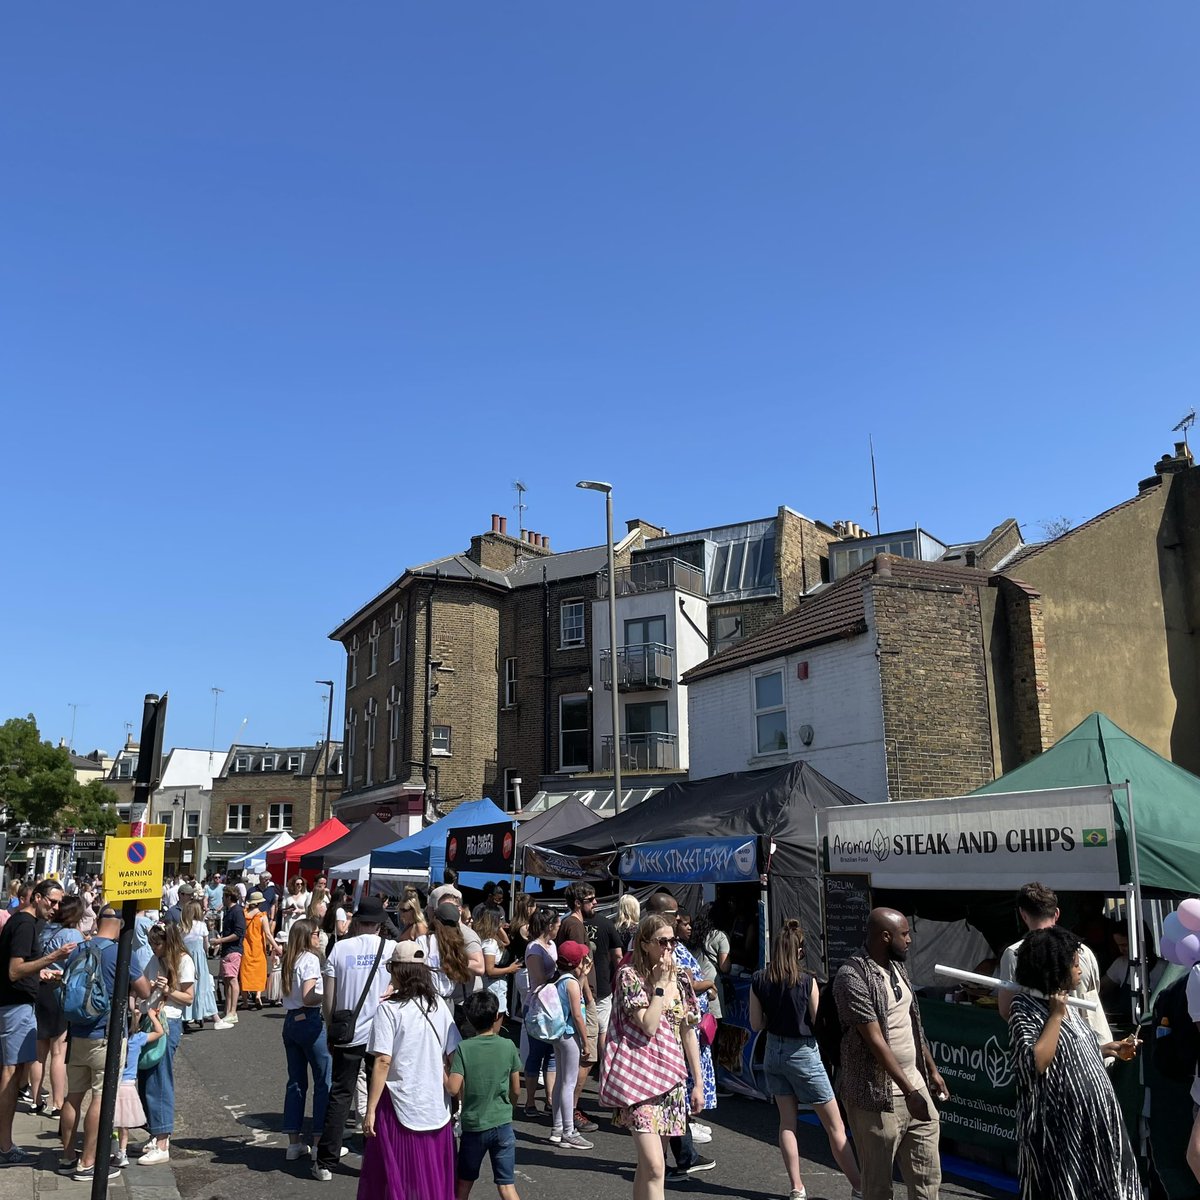 🌞 A wonderful Old York Road Unplugged festival yesterday, showing Wandsworth Town in all its glory! 🎶 Thank you @WandsworthTown for all your work organising.